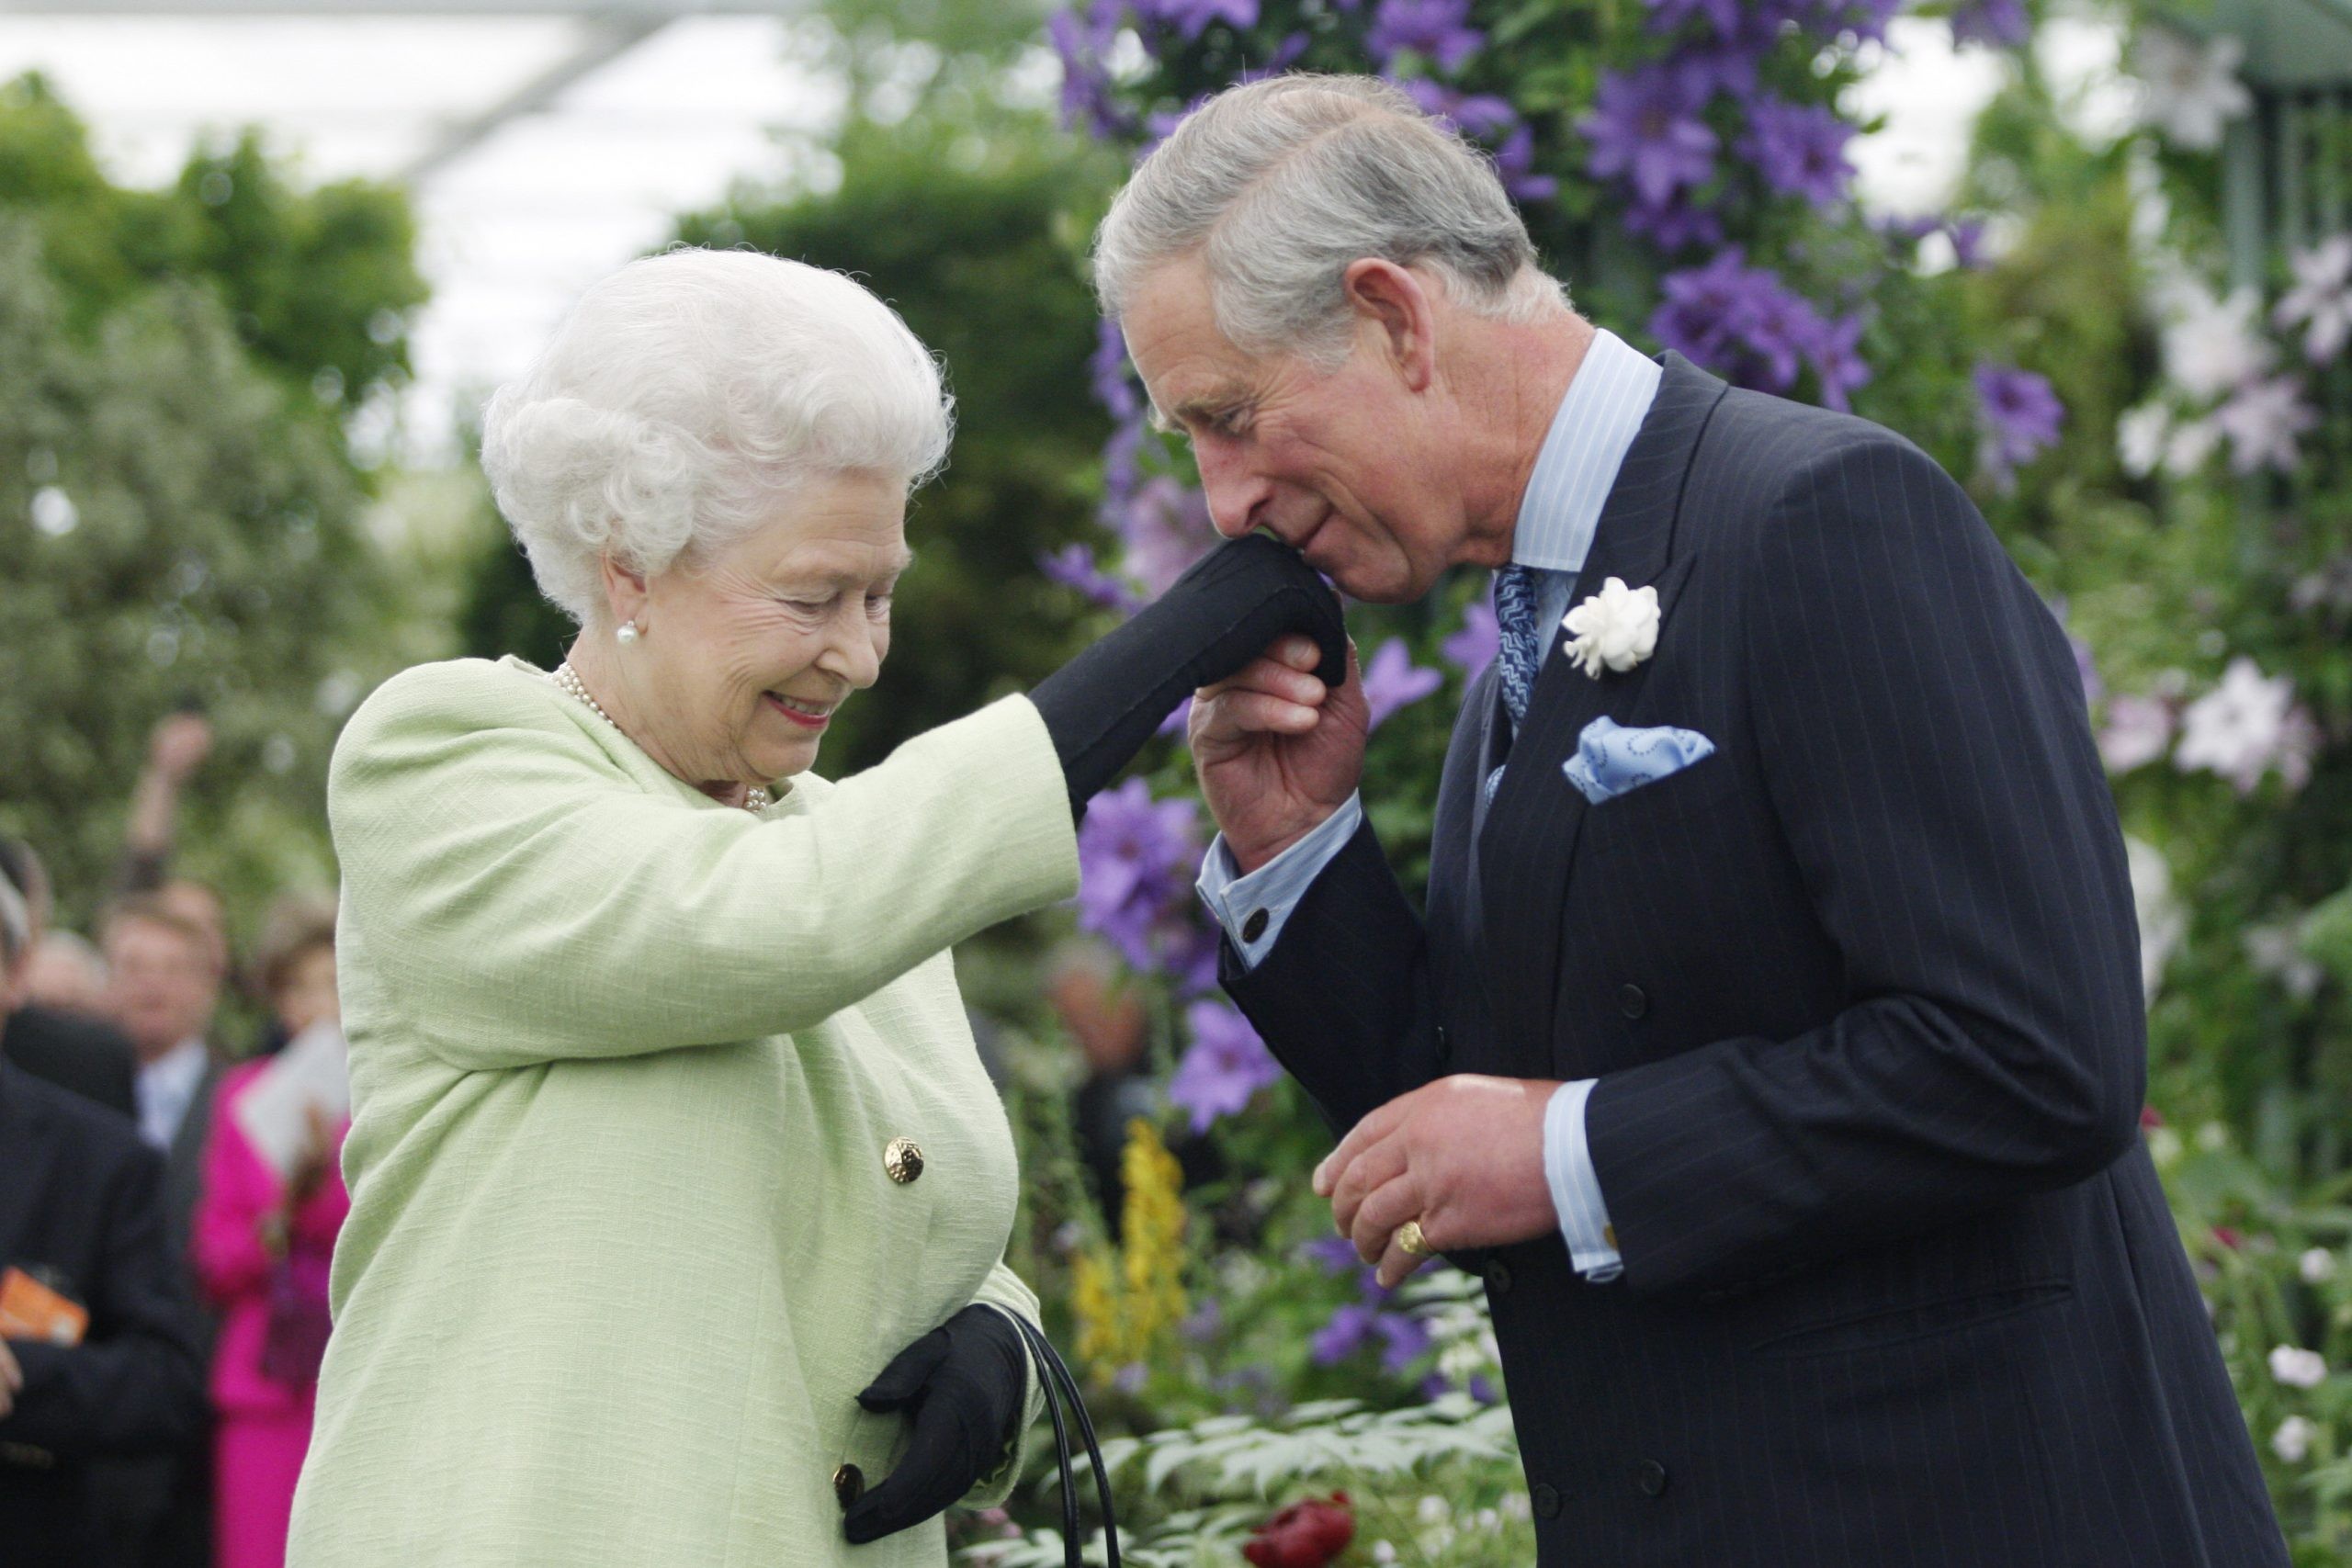 2009: Queen Elizabeth II presents Prince Charles, Prince of Wales with the Royal Horticultural Society's Victoria Medal of Honour during a visit to the Chelsea Flower Show in 2009 in London.